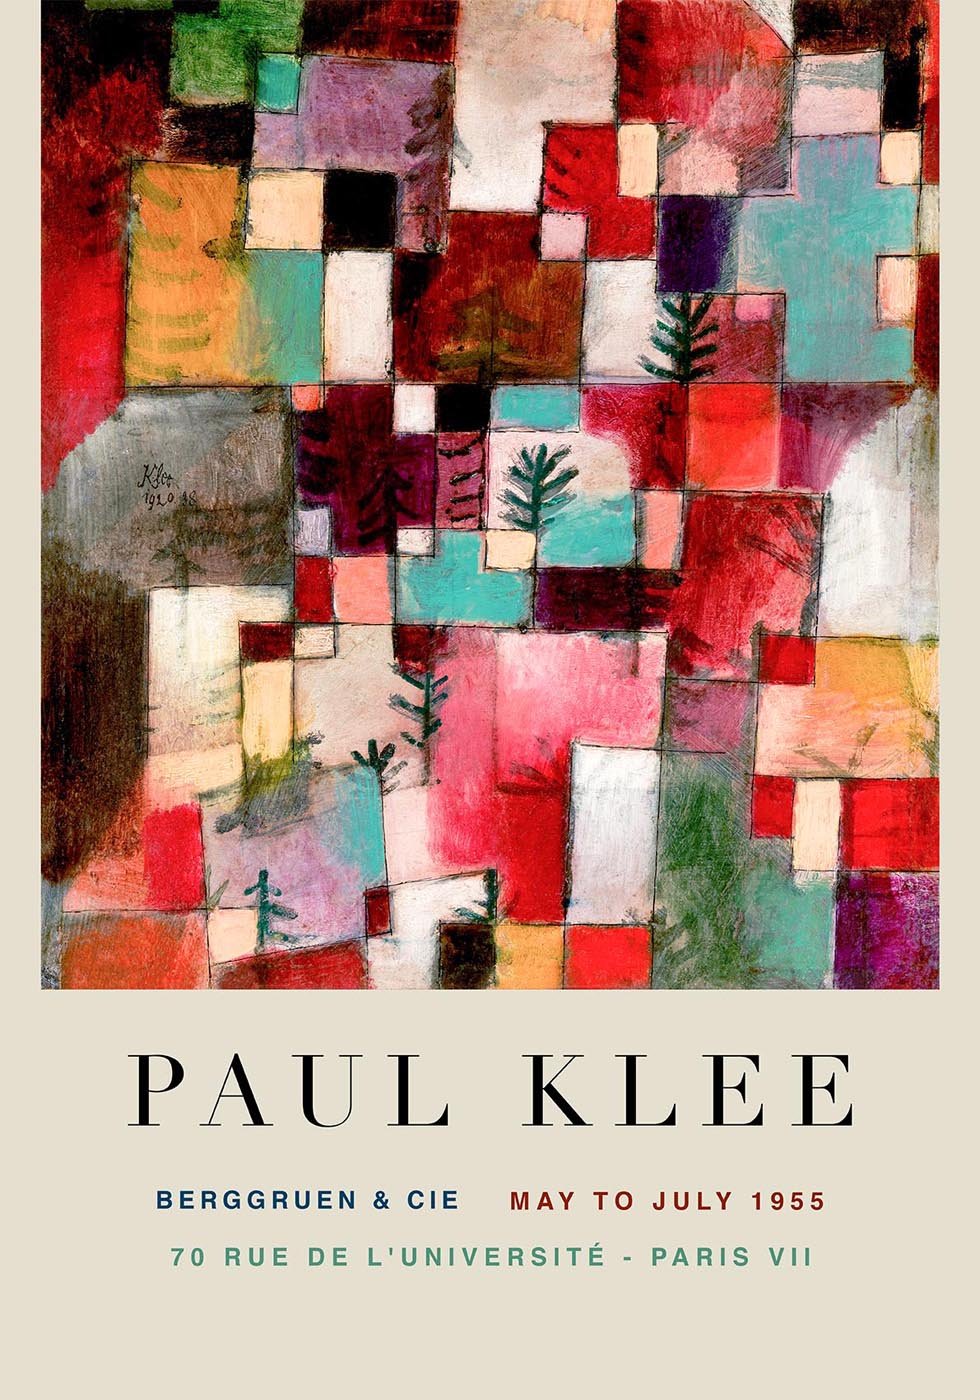 Paul Klee Redgreen and Violet-Yellow Rhythms Art Exhibition Poster